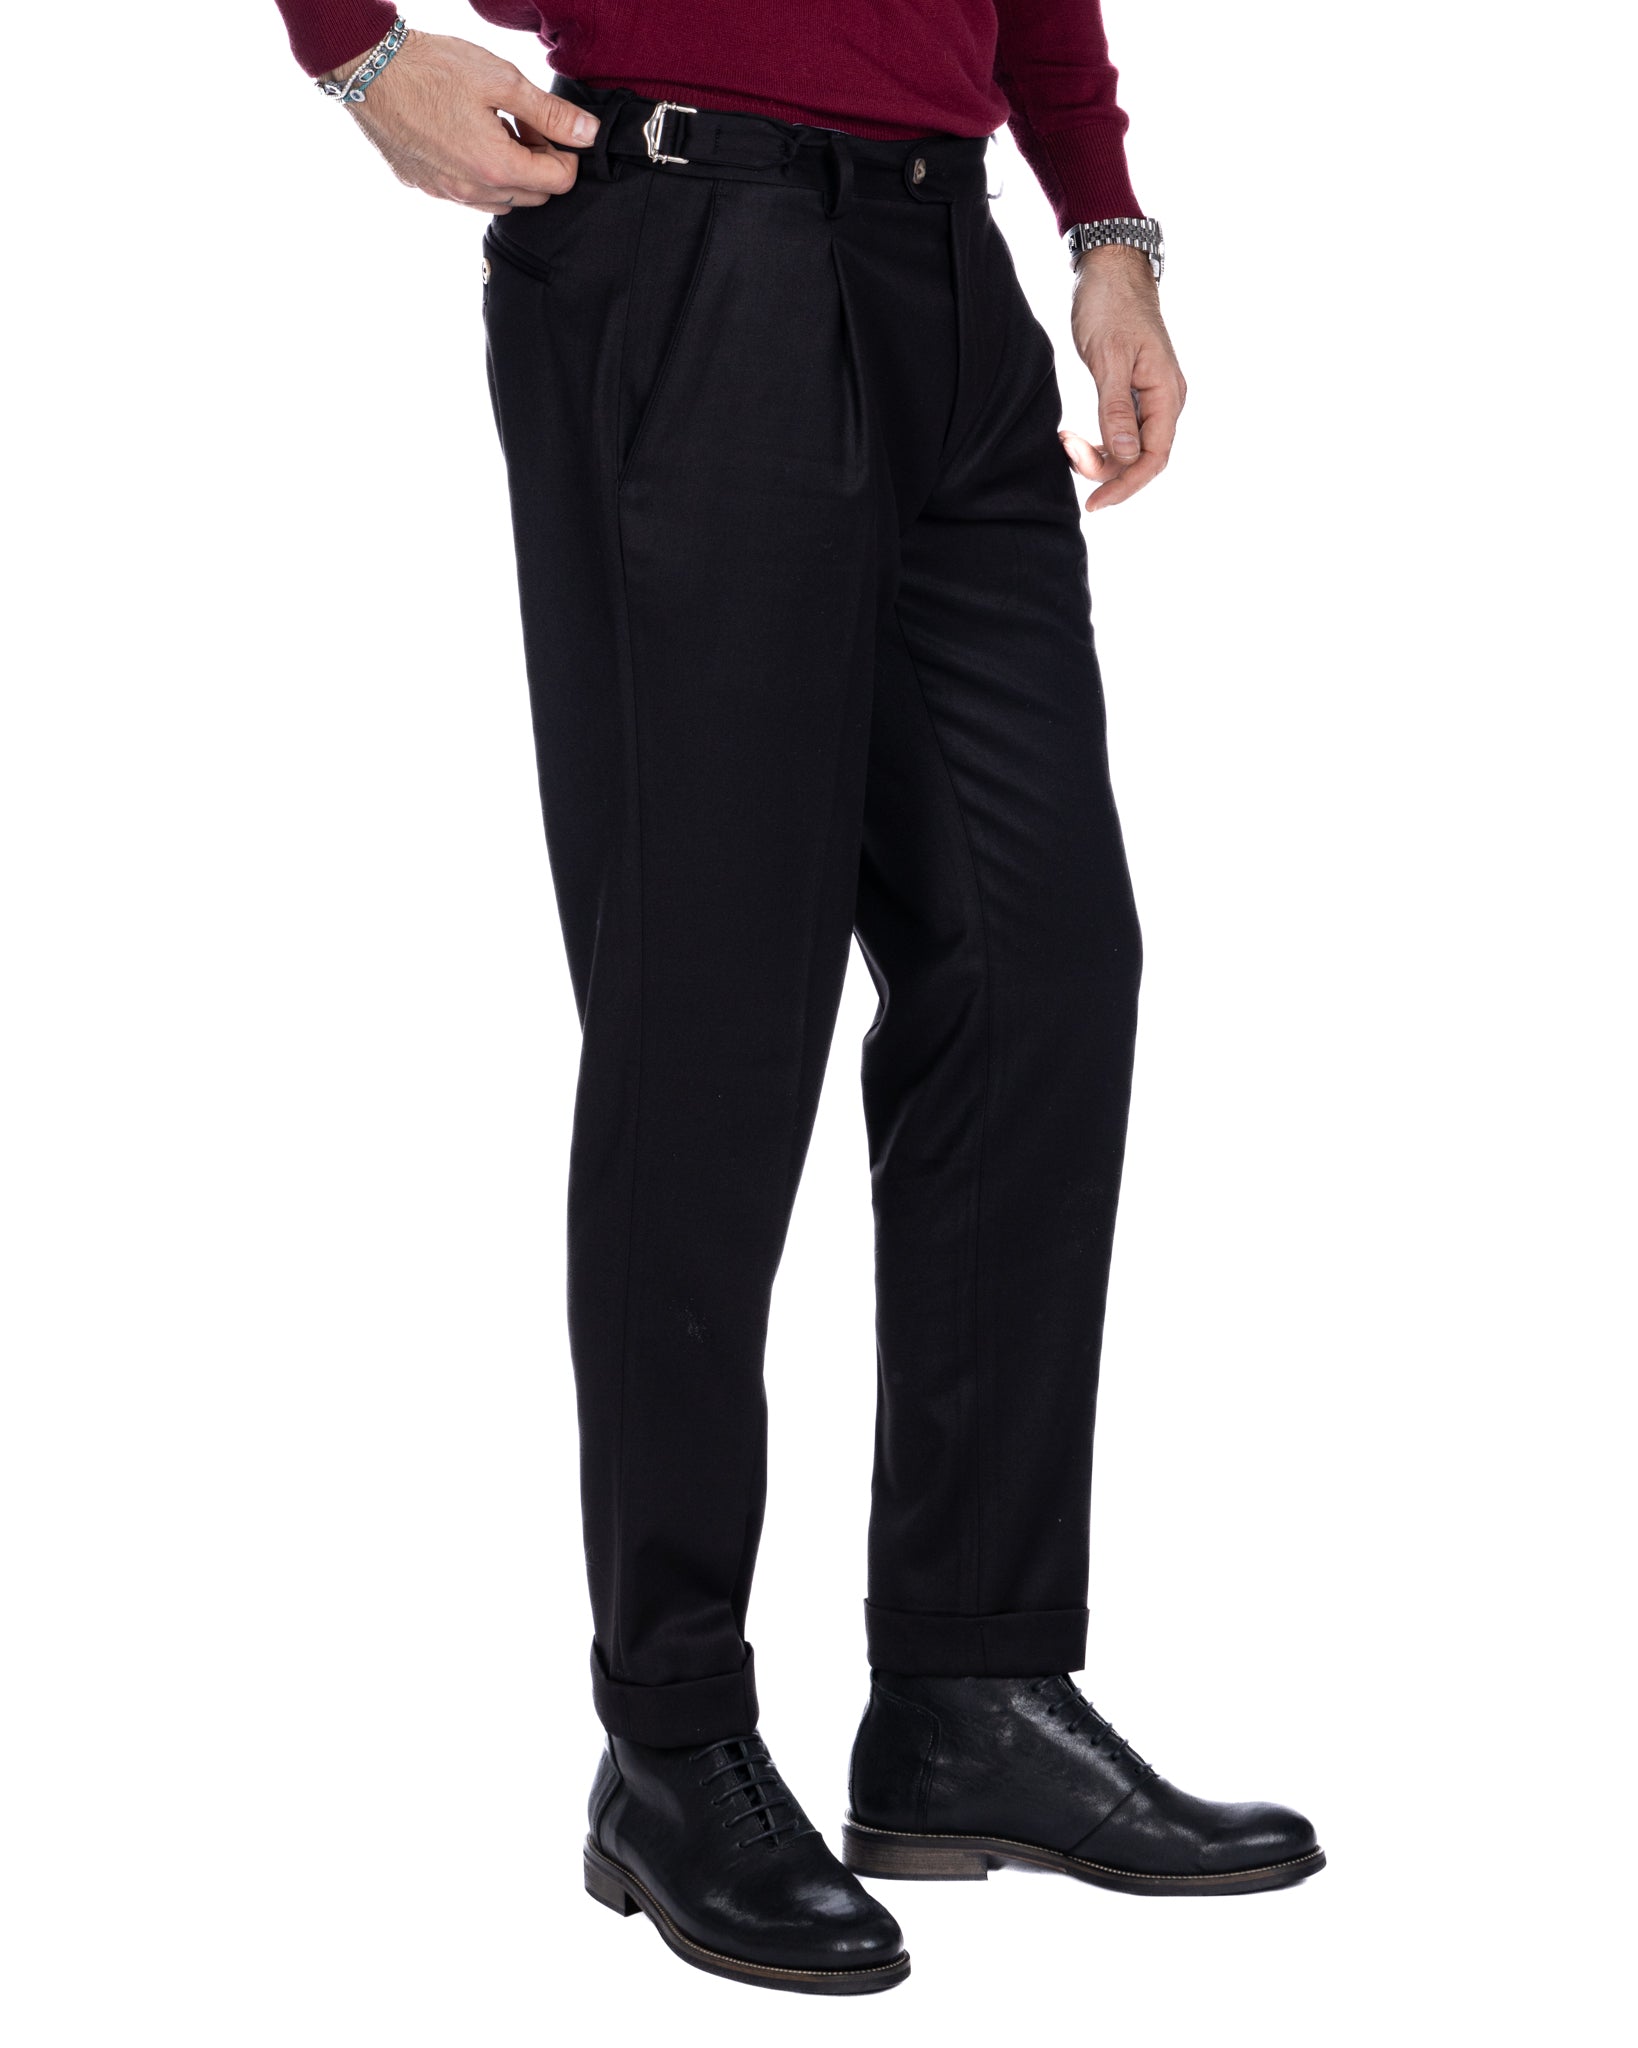 Monopoli - trousers with black buckles